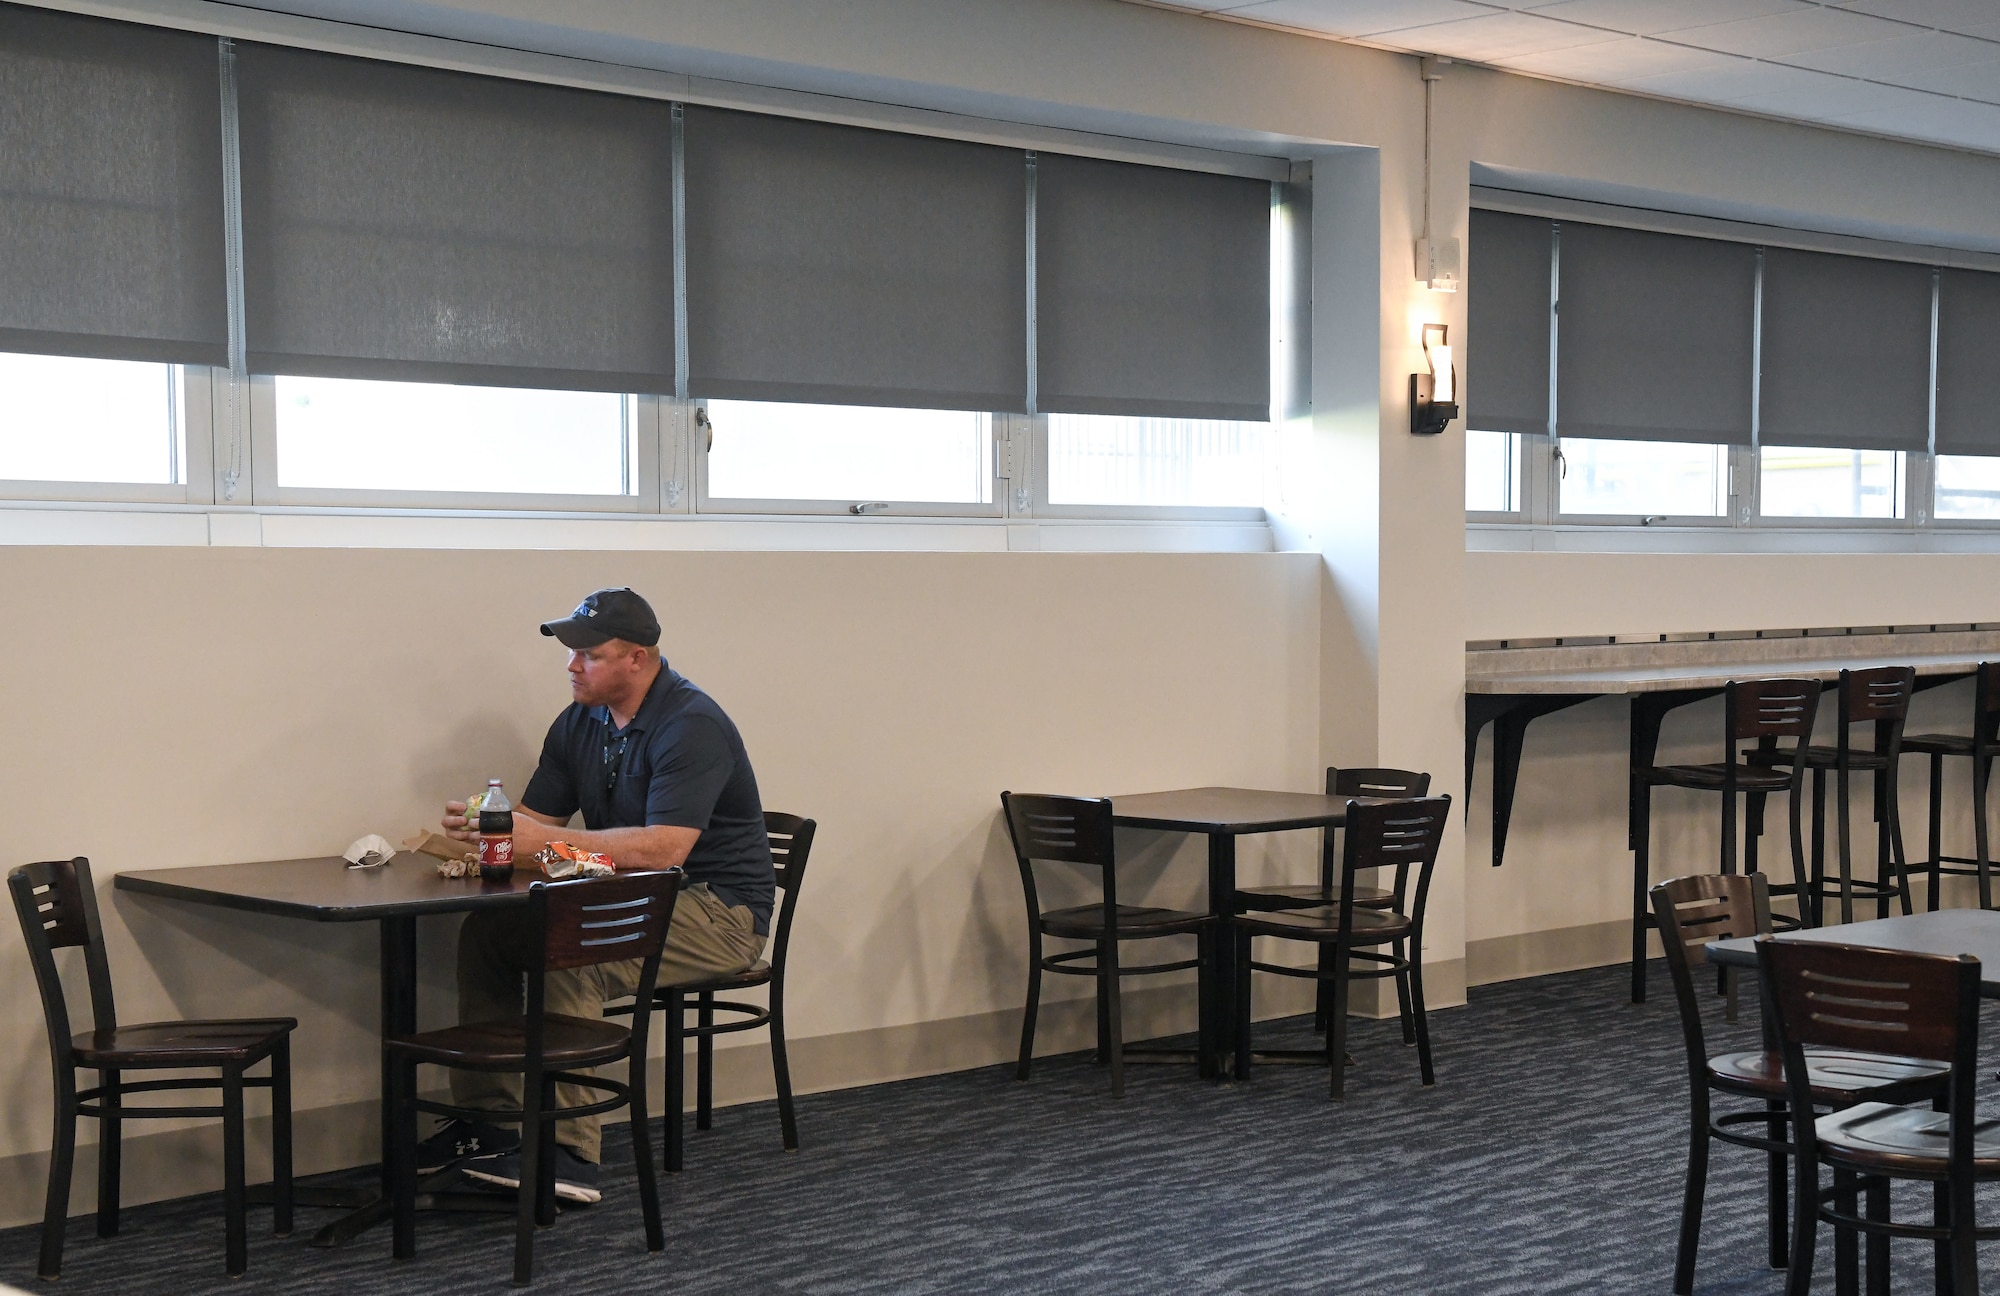 Sterling Price, an Arnold Engineering Development Complex network engineer, dines in the newly-renovated Café 100, Sept. 9, 2021, at Arnold Air Force Base, Tenn. In the right of the photo, counter-height seating with electrical outlets for charging electronics can be seen, one of the additions made to the seating area. (U.S. Air Force photo by Jill Pickett)